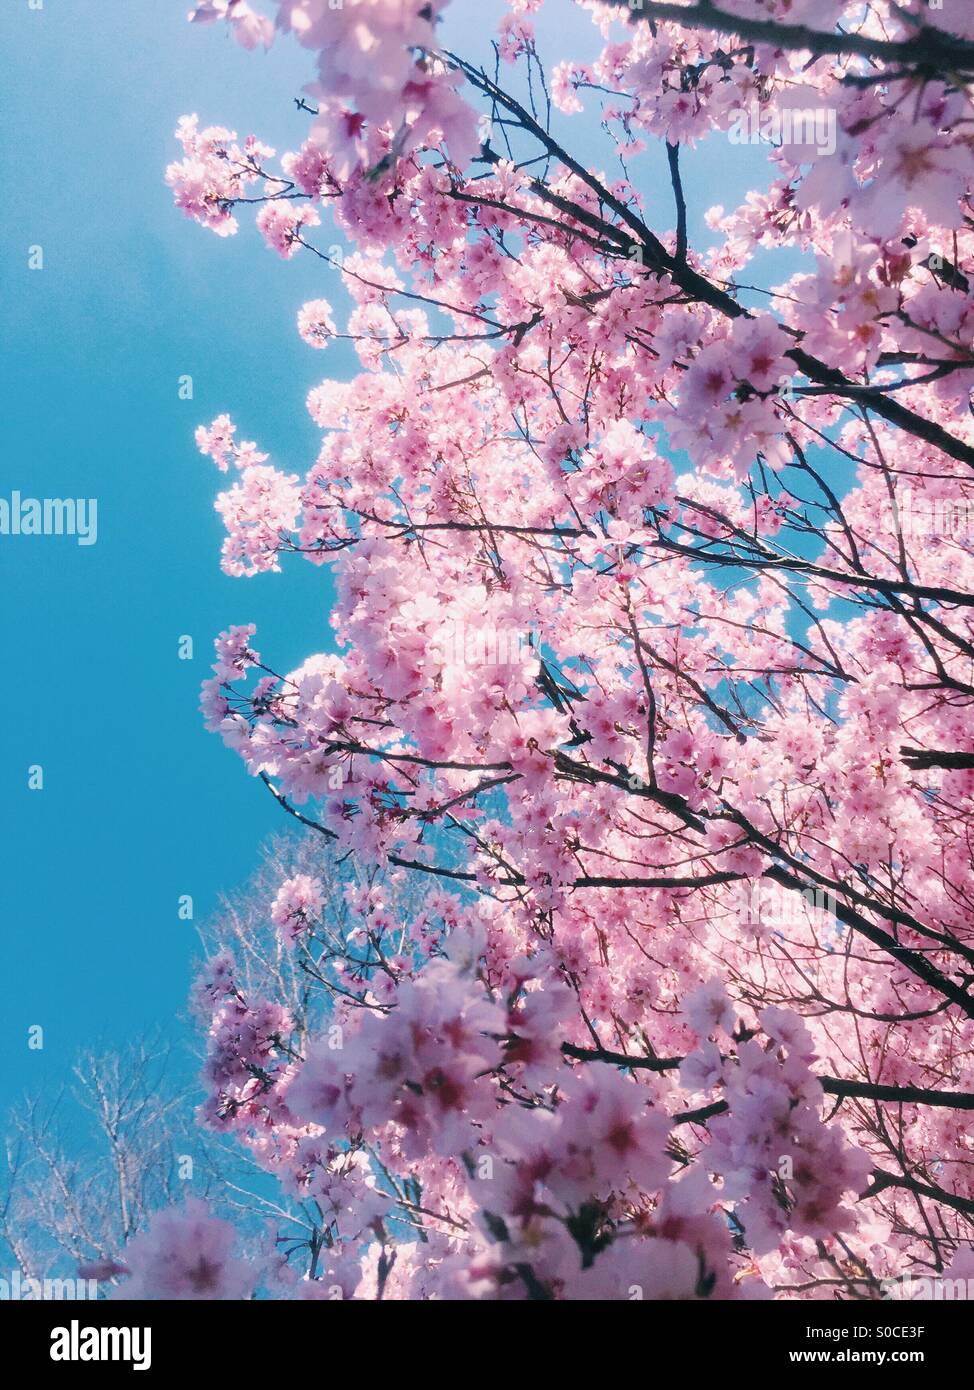 Beautiful pink sakura or cherry blossoms, one part bathed in sunlight and another part in the shadows, with blue sky in background. Stock Photo